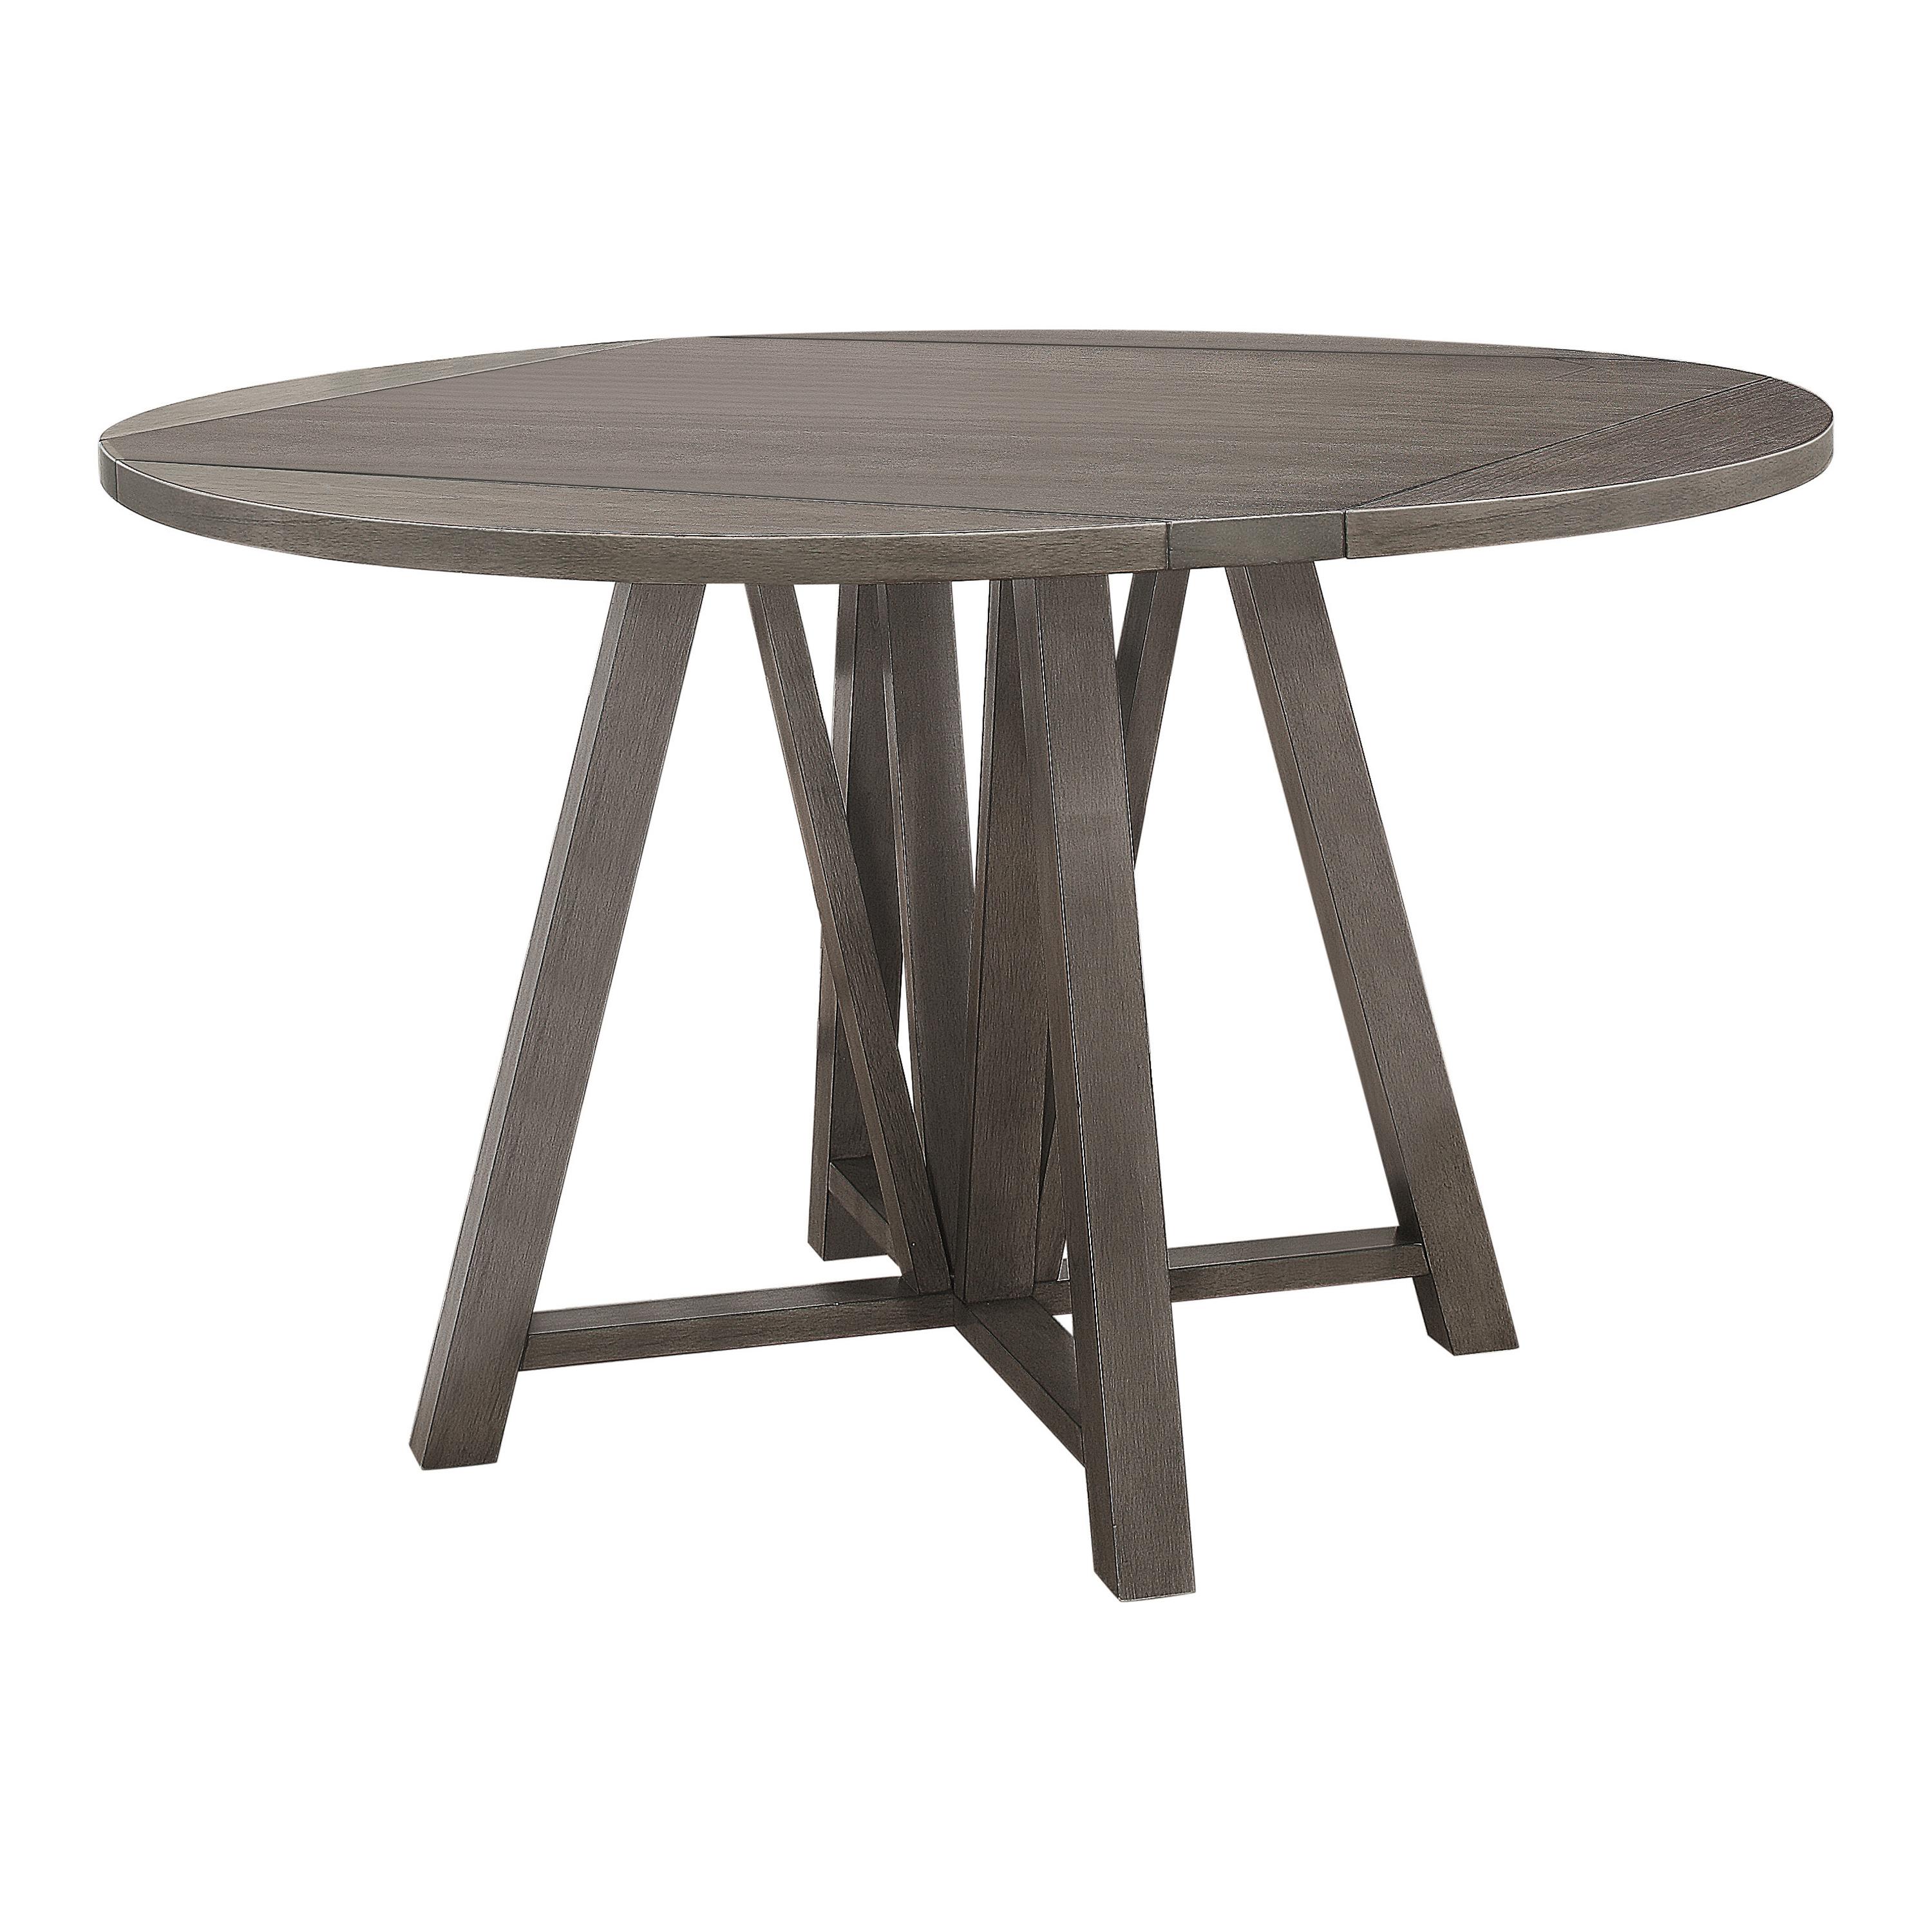 Rustic Counter Height Table 109858 Athens 109858 in Gray 